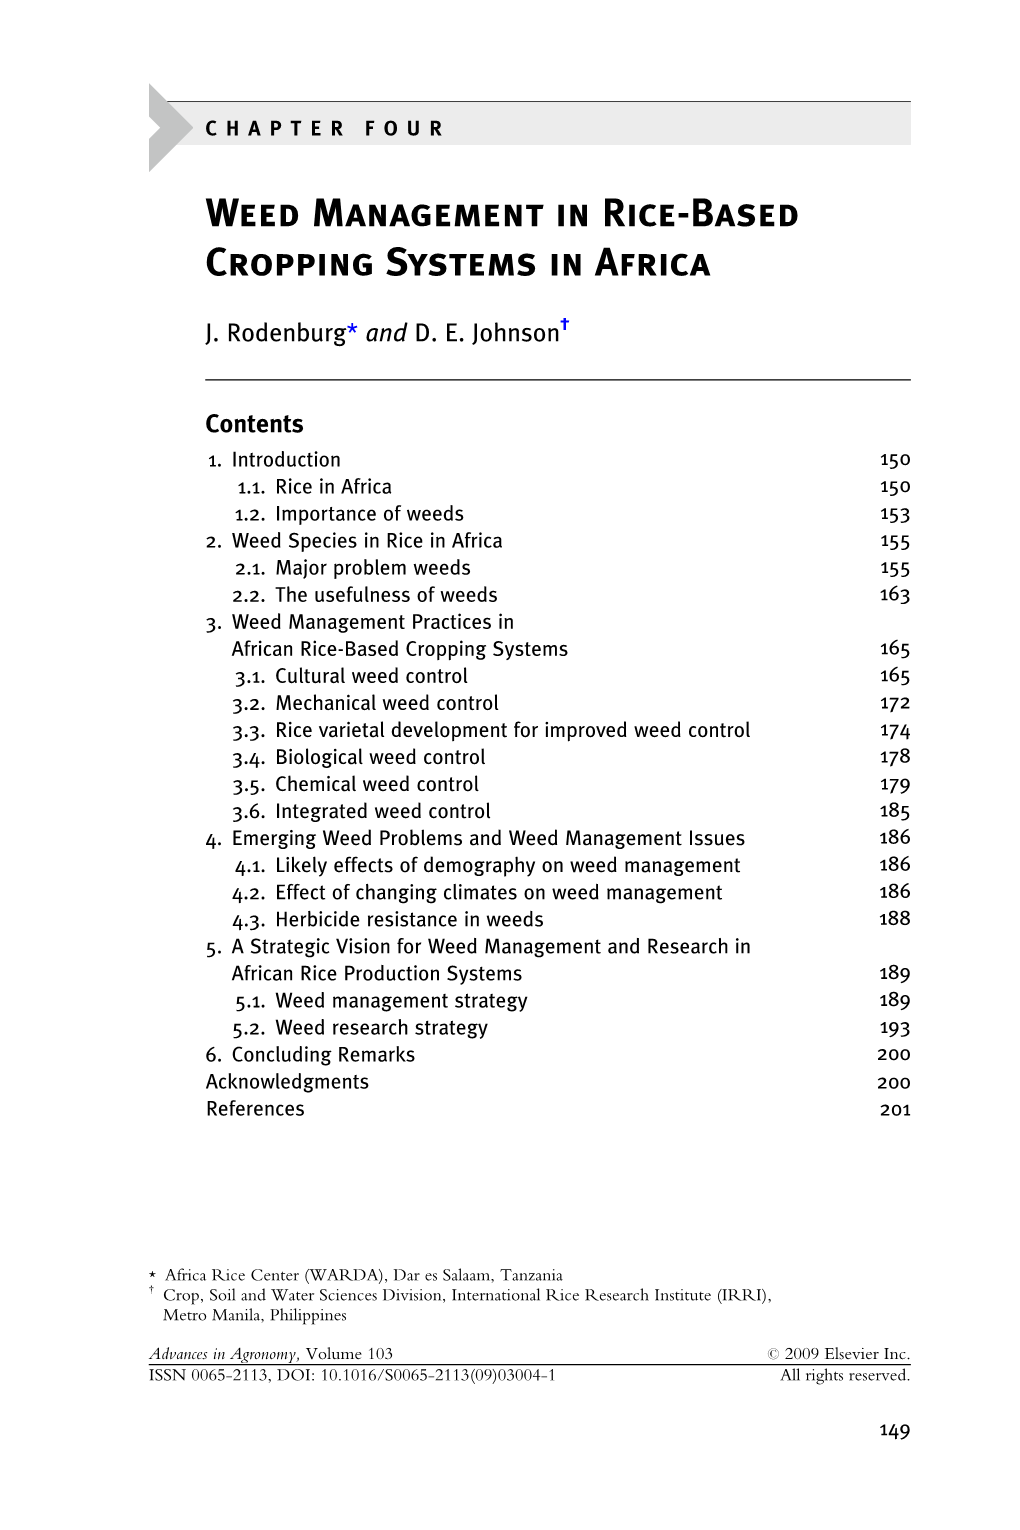 Weed Management in Rice-Based Cropping Systems in Africa